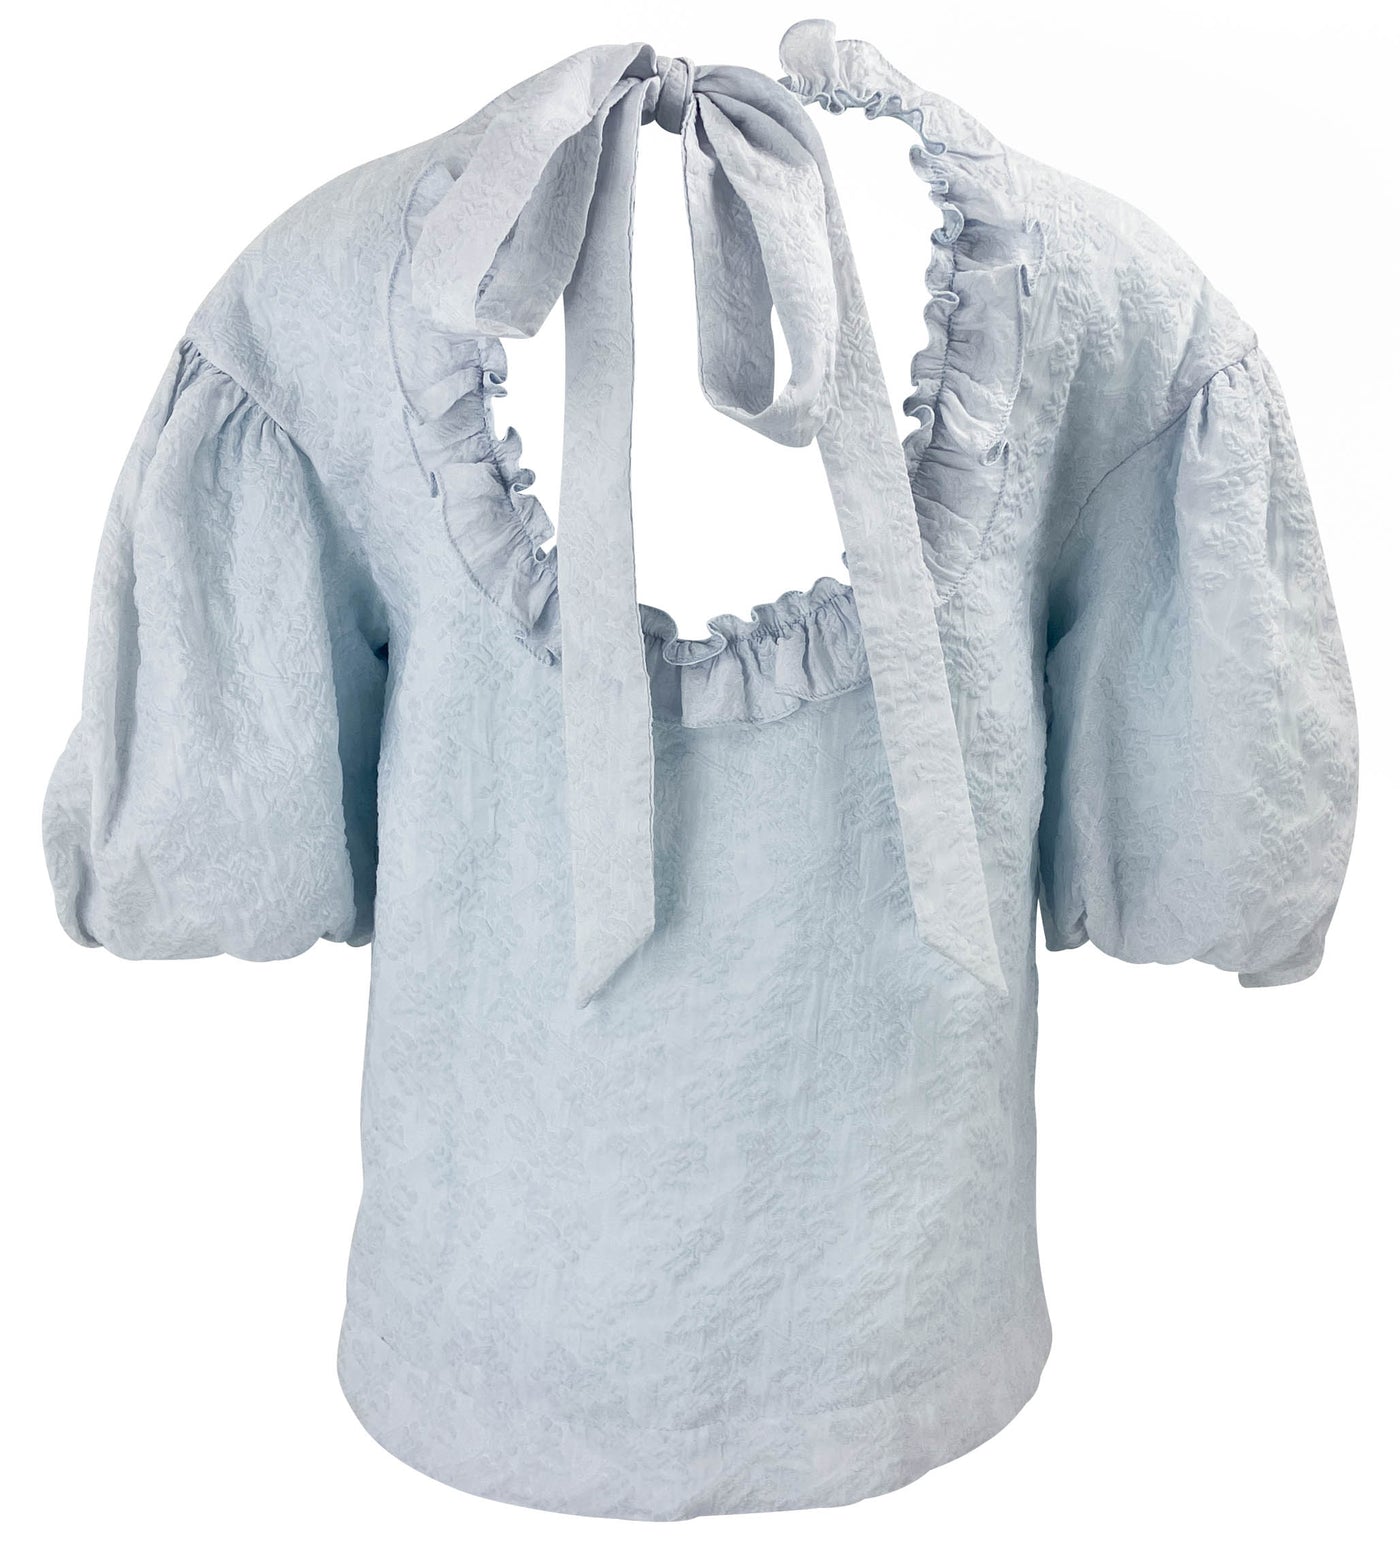 Simone Rocha Puff Sleeve Blouse with Pearl Detail in Pale Blue - Discounts on Simone Rocha at UAL